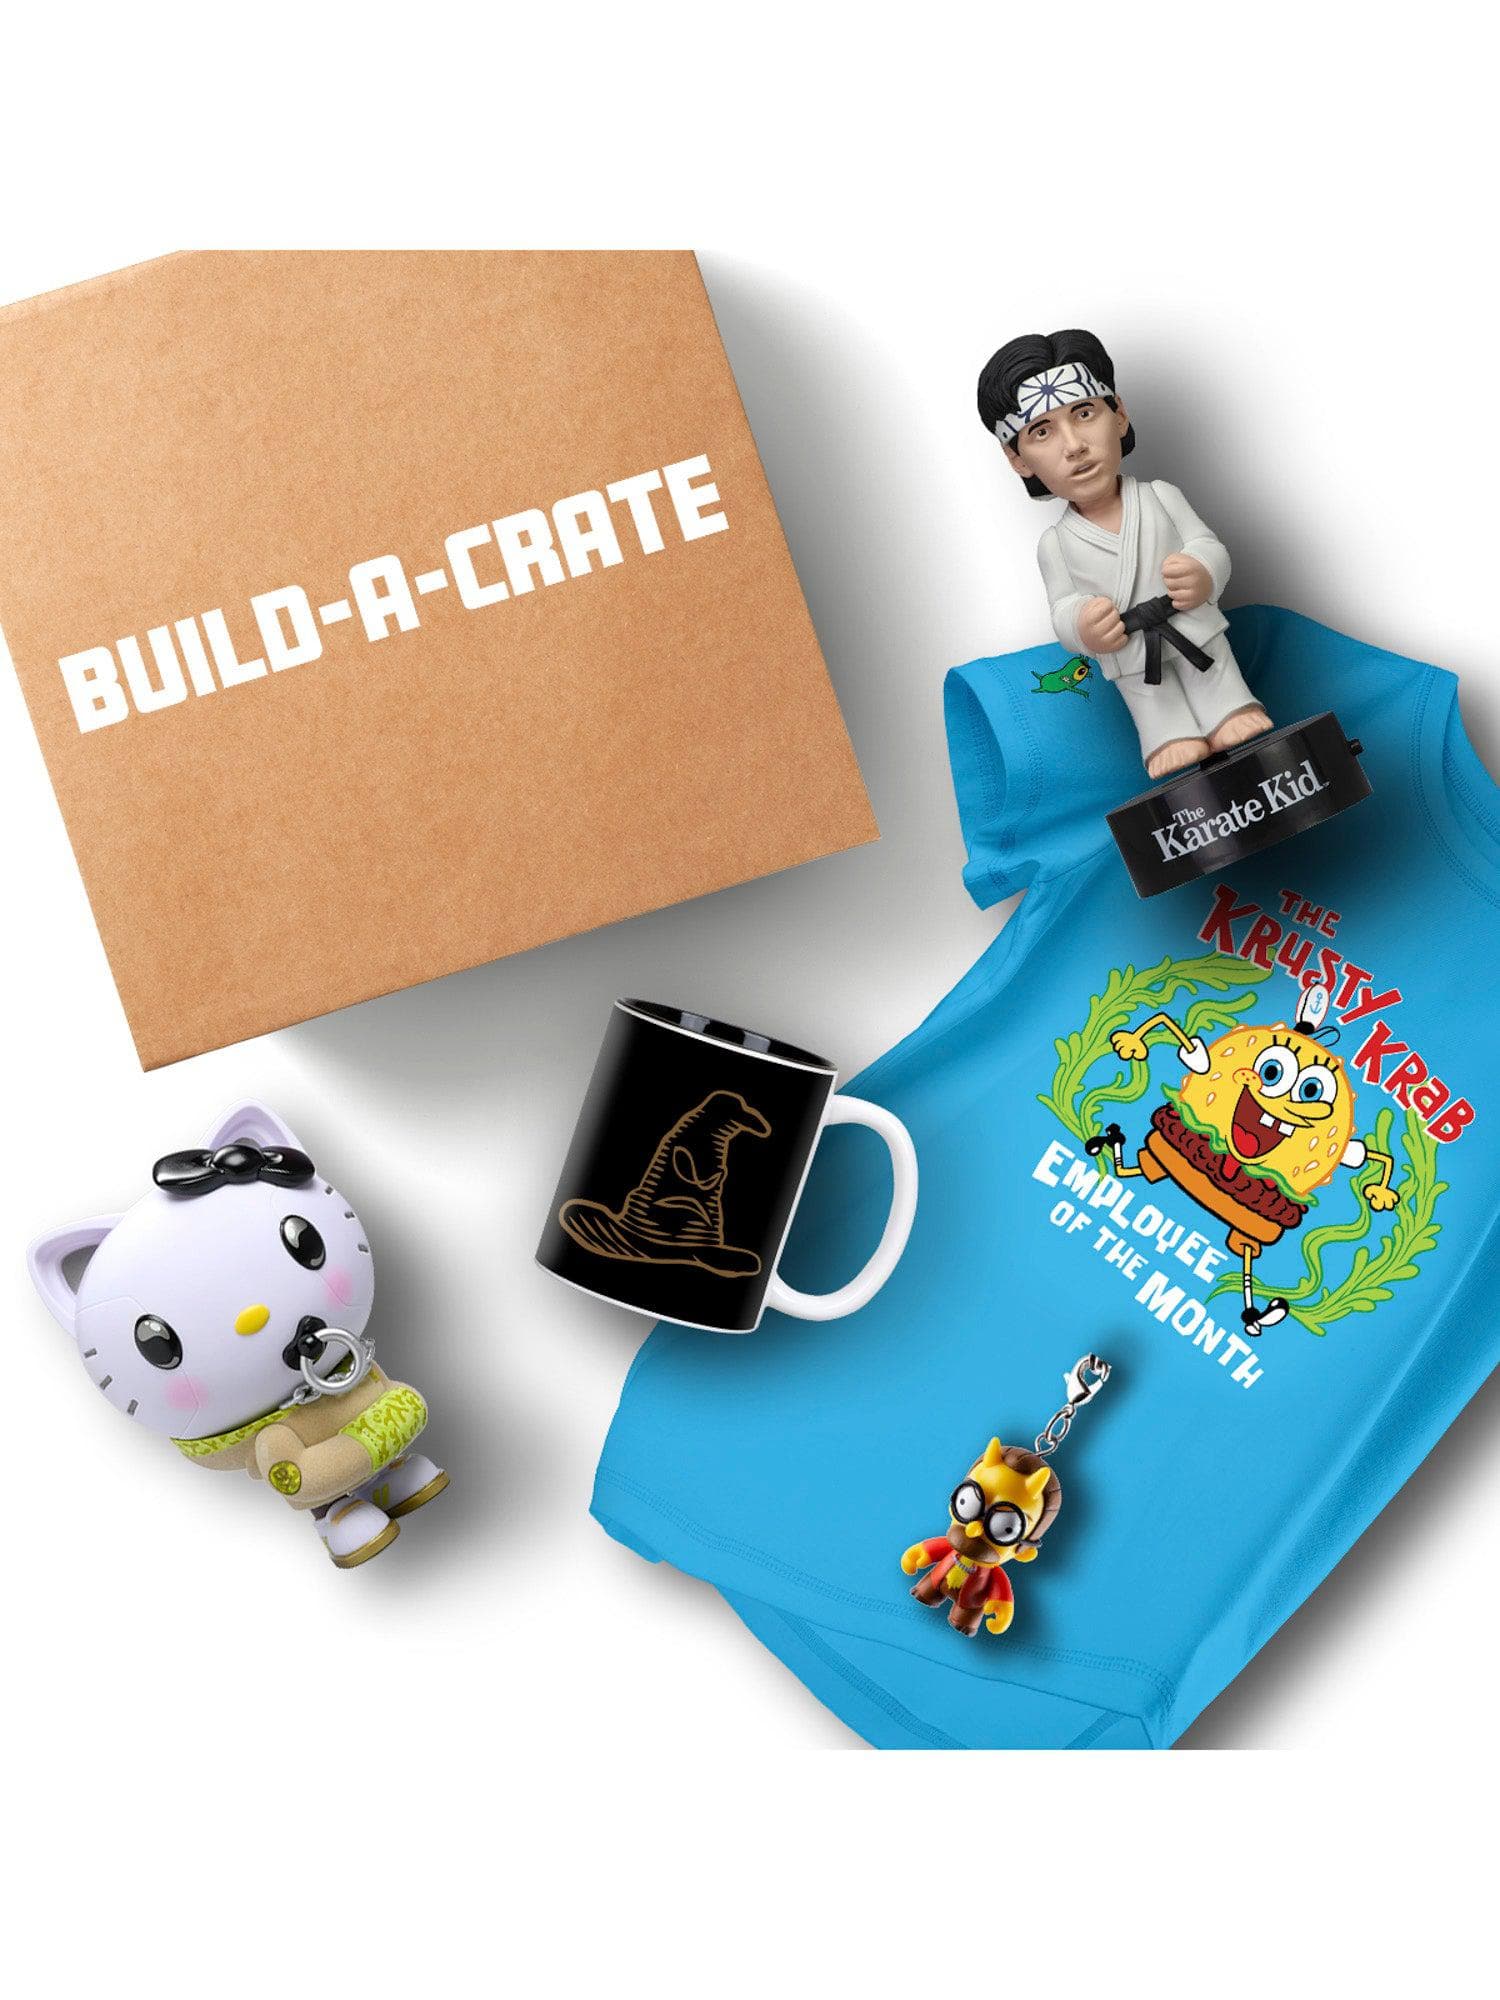 Build-A-Crate Pop Culture Box - 5 Items | Collectibles, Geek Toys, Action Figures & Gifts